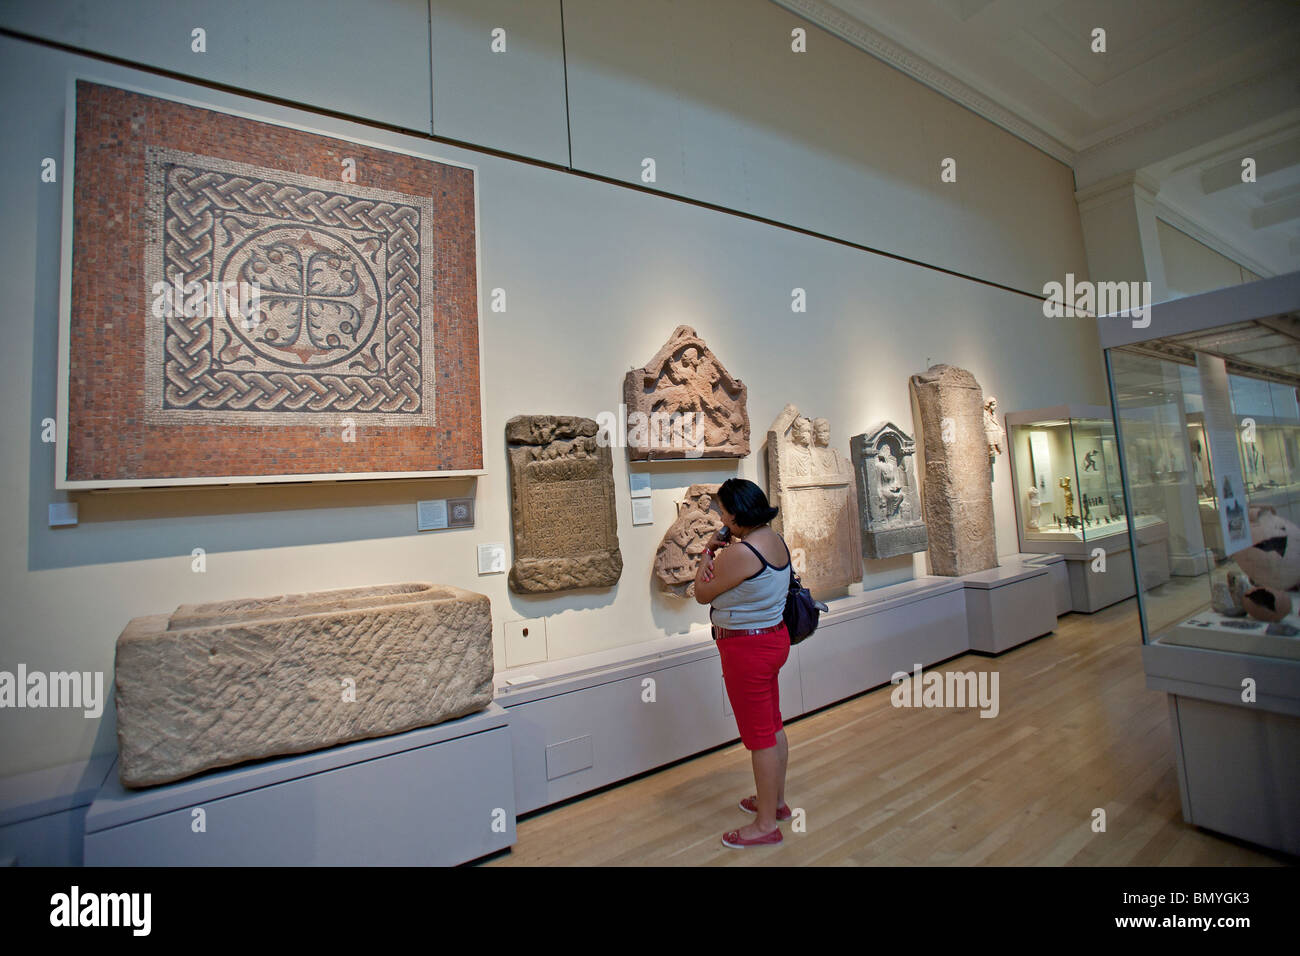 Exhibition rooms in  the British Museum Bloomsbury London England GB UK Stock Photo